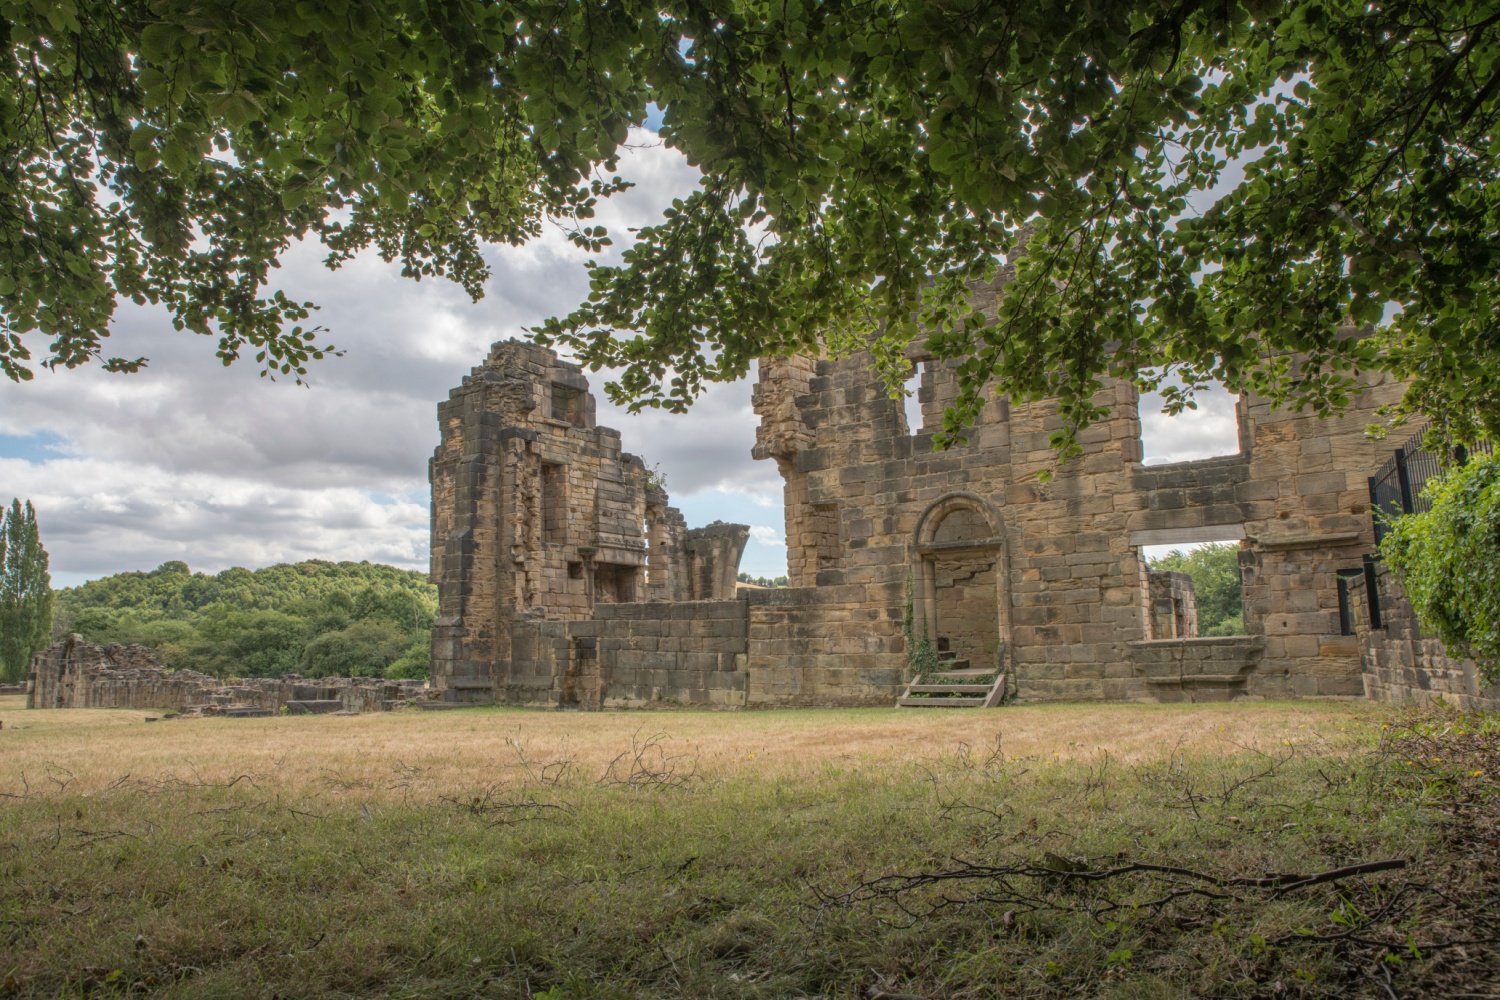 Image name monk bretton priory barnsley south yorkshire the 7 image from the post A look at the history of Monk Bretton Priory, Barnsley, with Dr Emma Wells in Yorkshire.com.